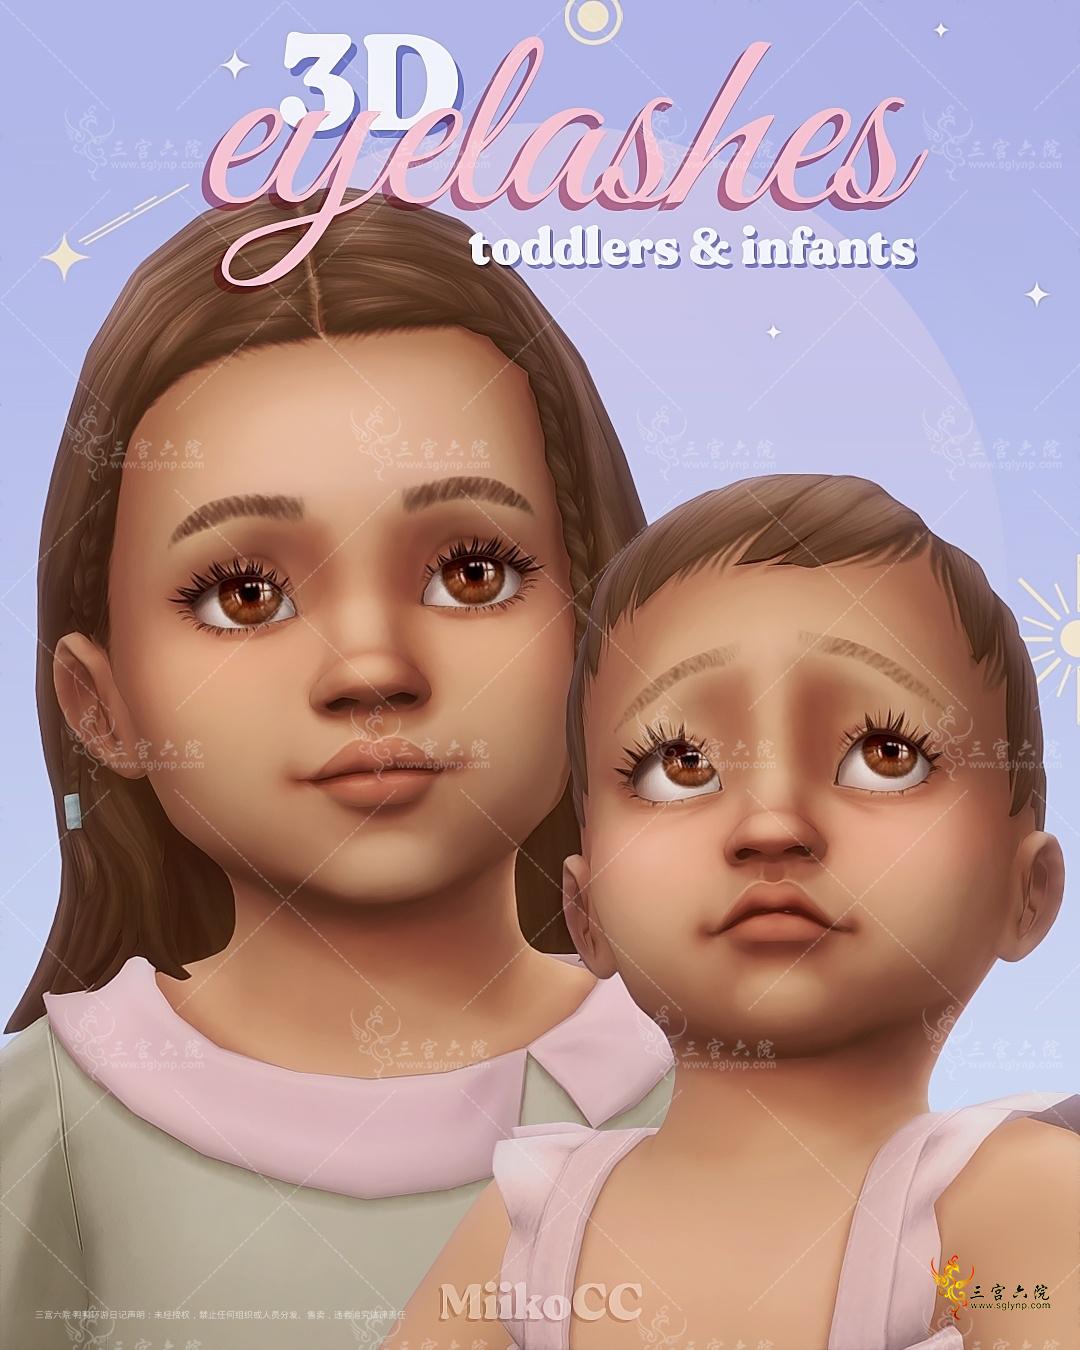 infants-toddlers-lashes - Copy.jpg